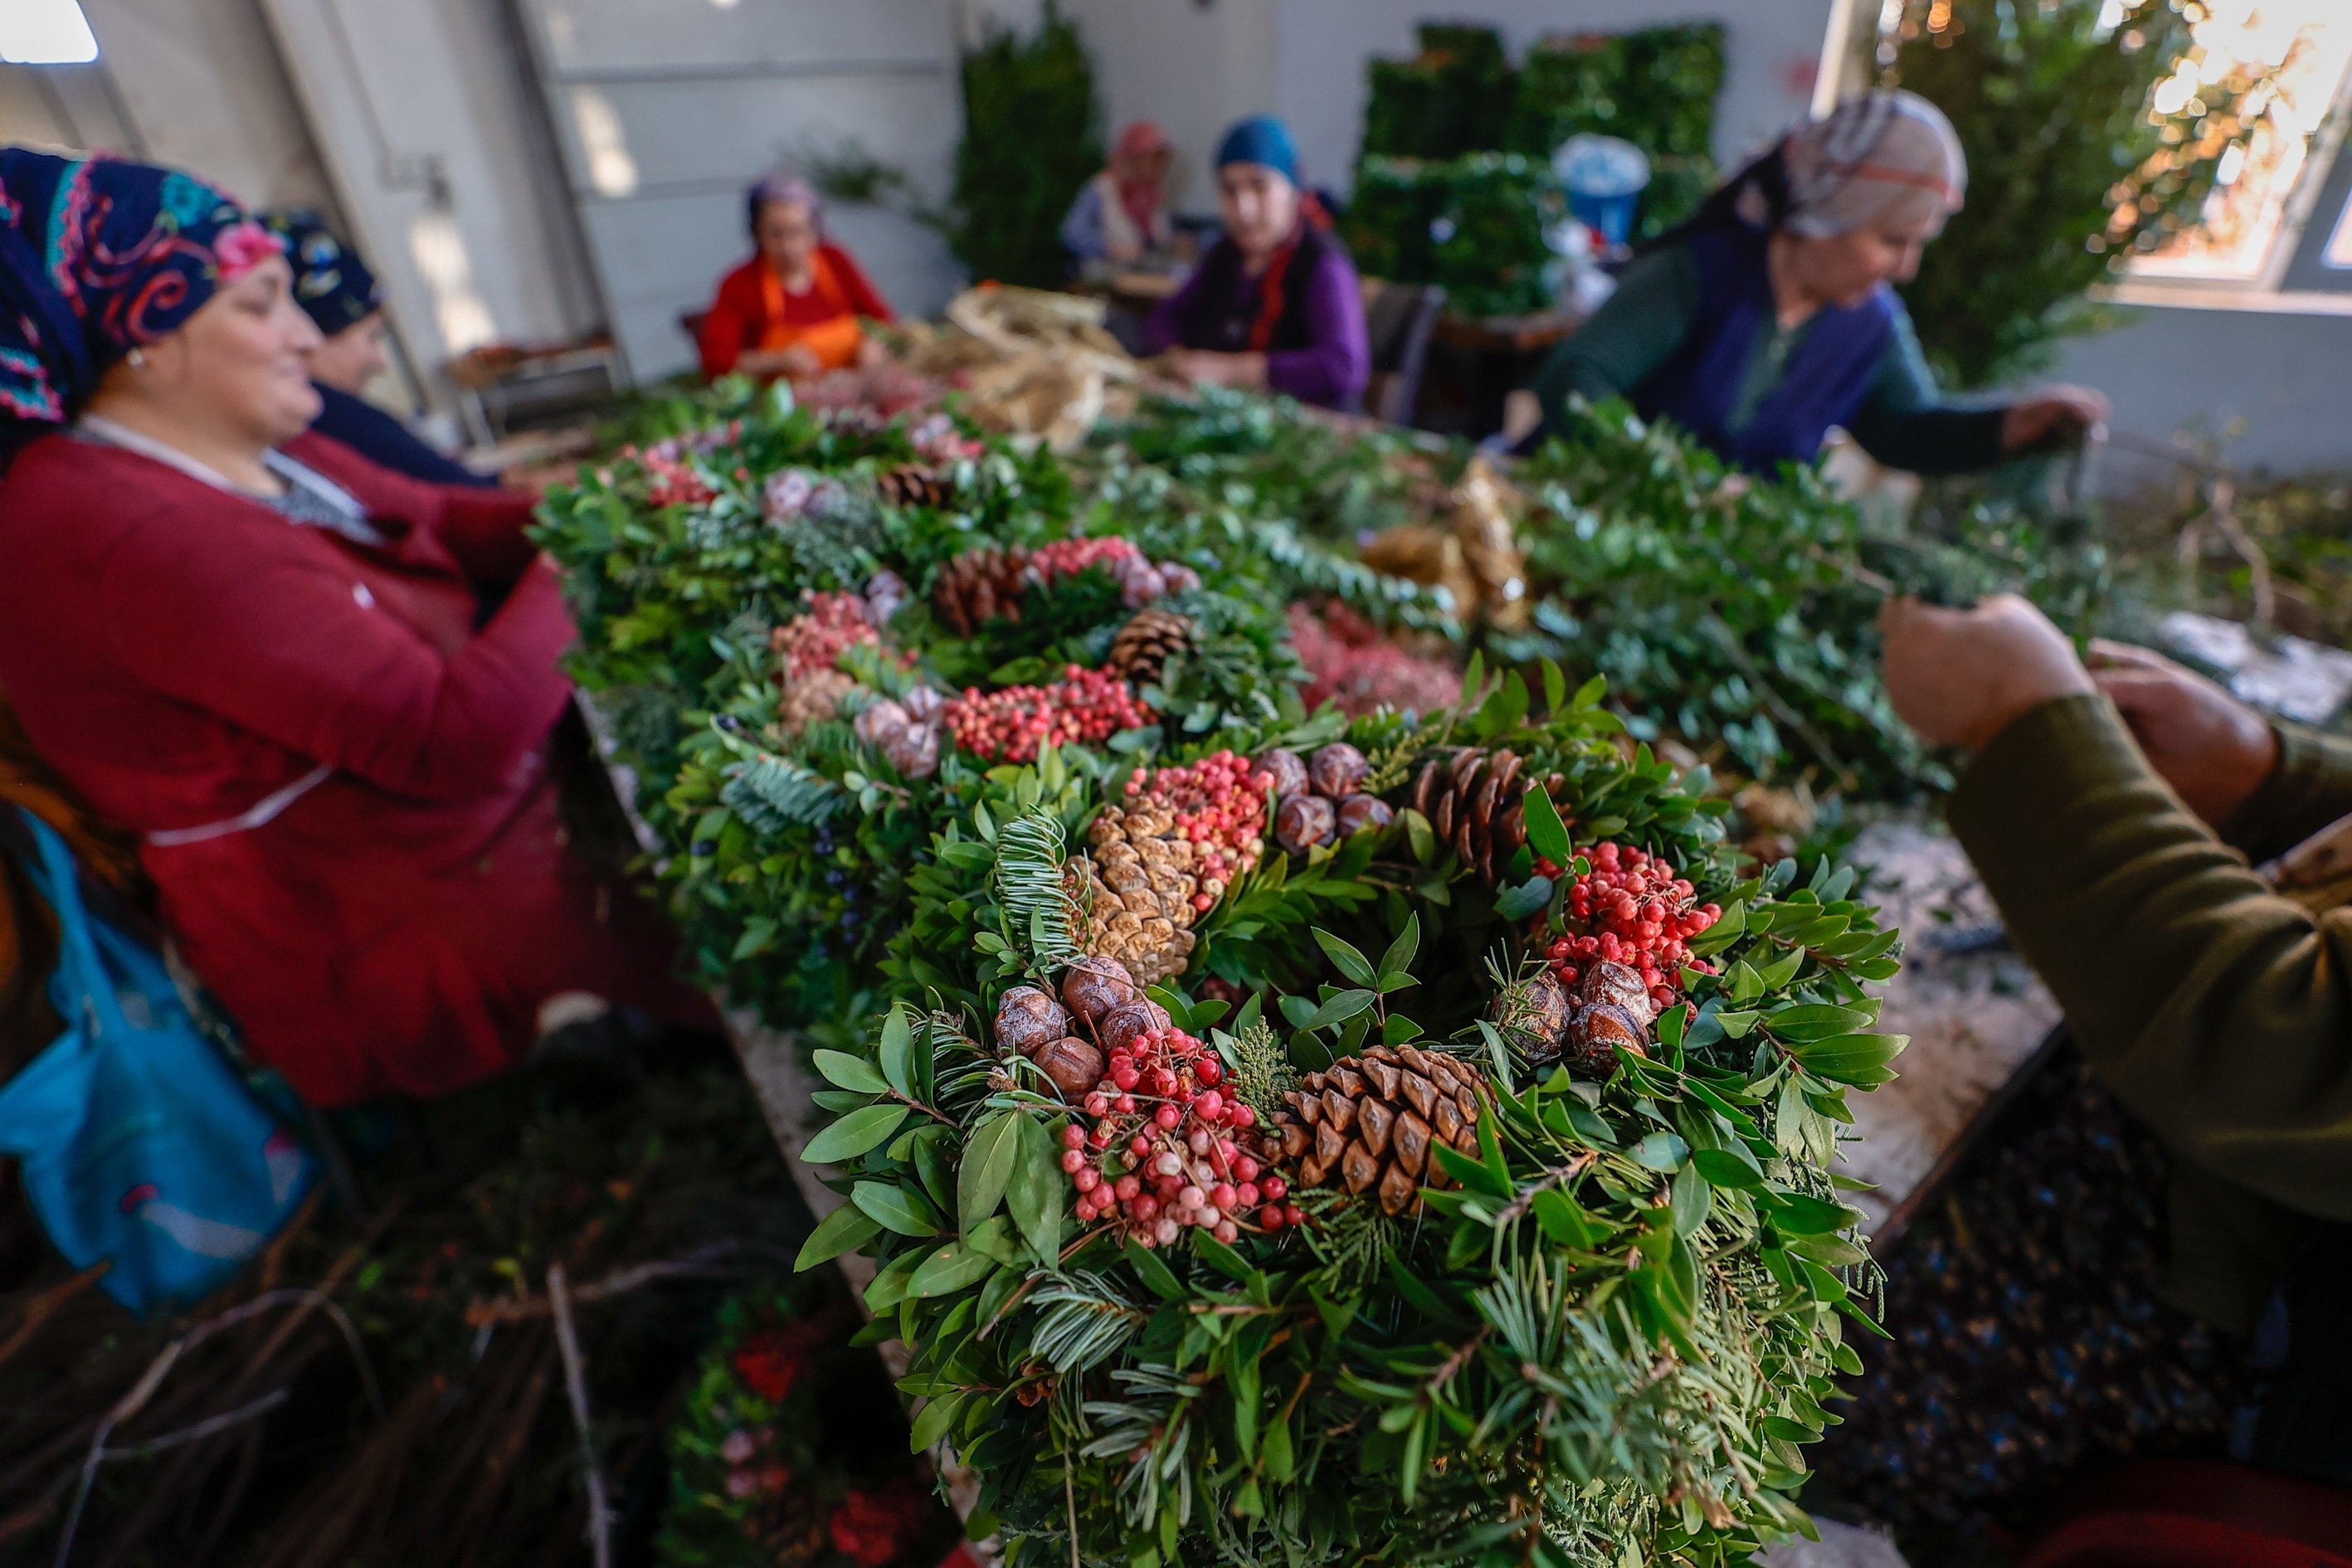 Women work on wreaths for the upcoming Christmas and New Year’s Eve holidays, in the southern province of Antalya, Turkey, Dec. 5, 2021. (AA Photo)